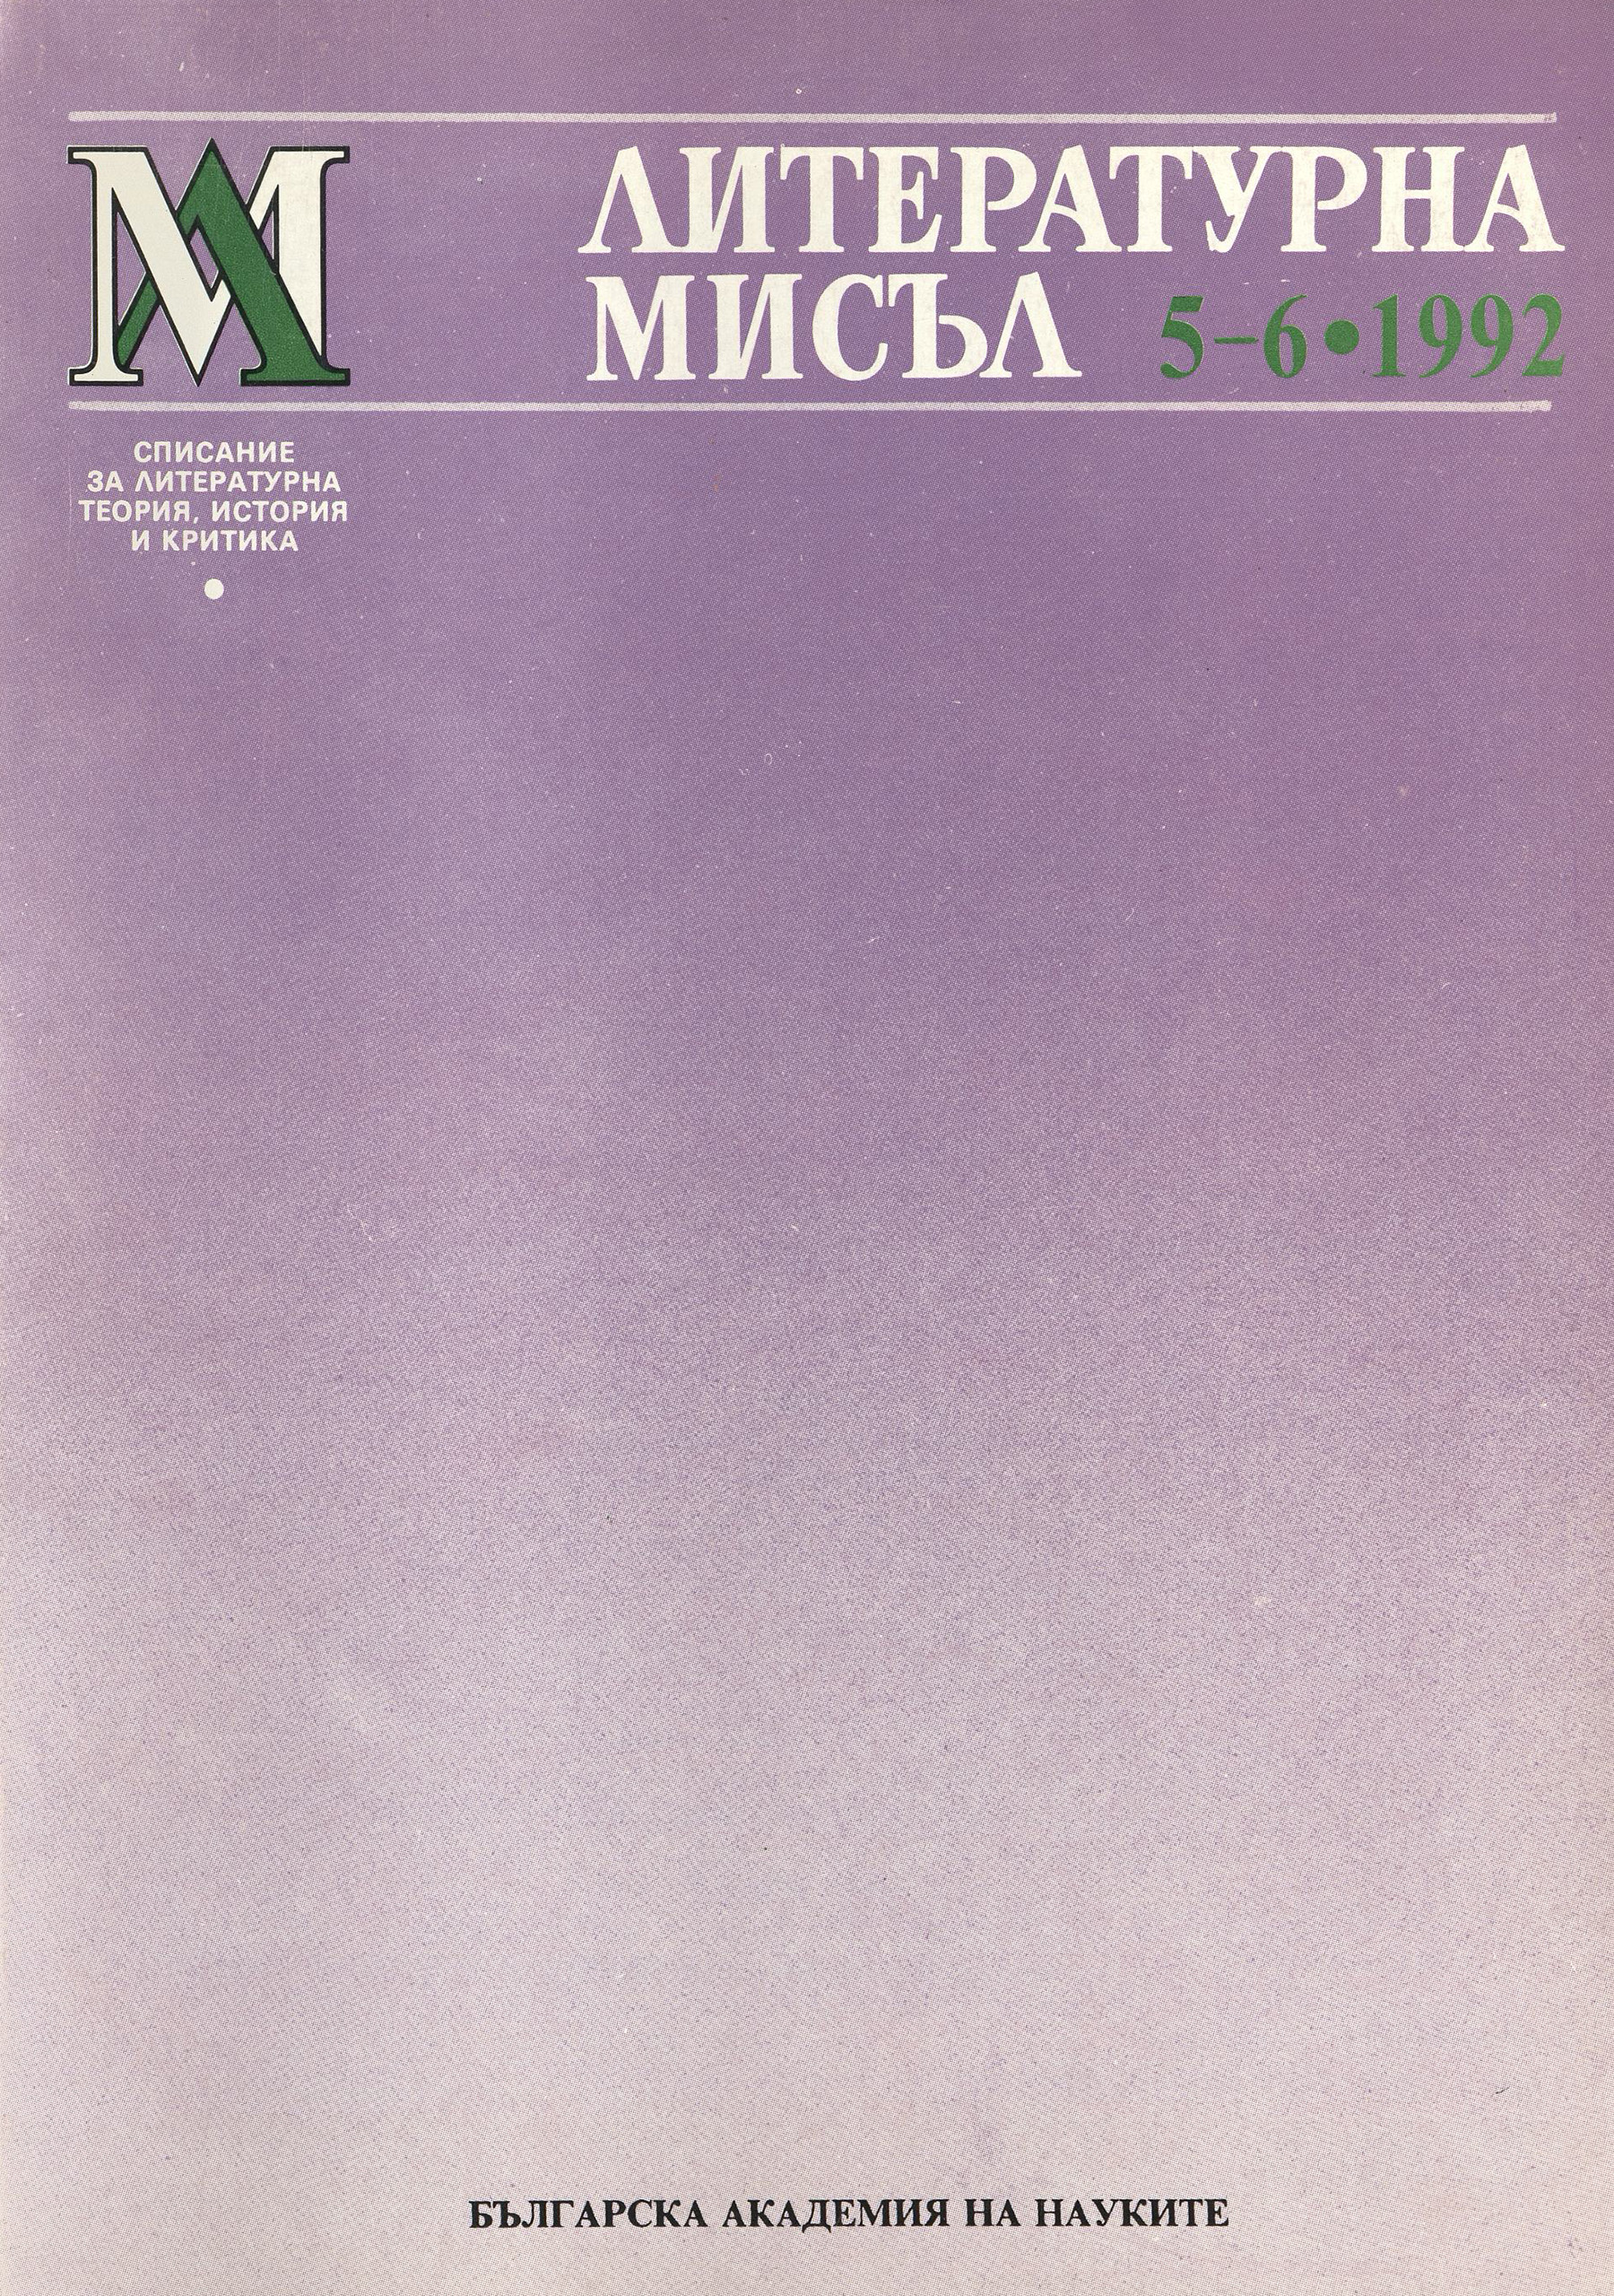 Issue 5-6, 1992